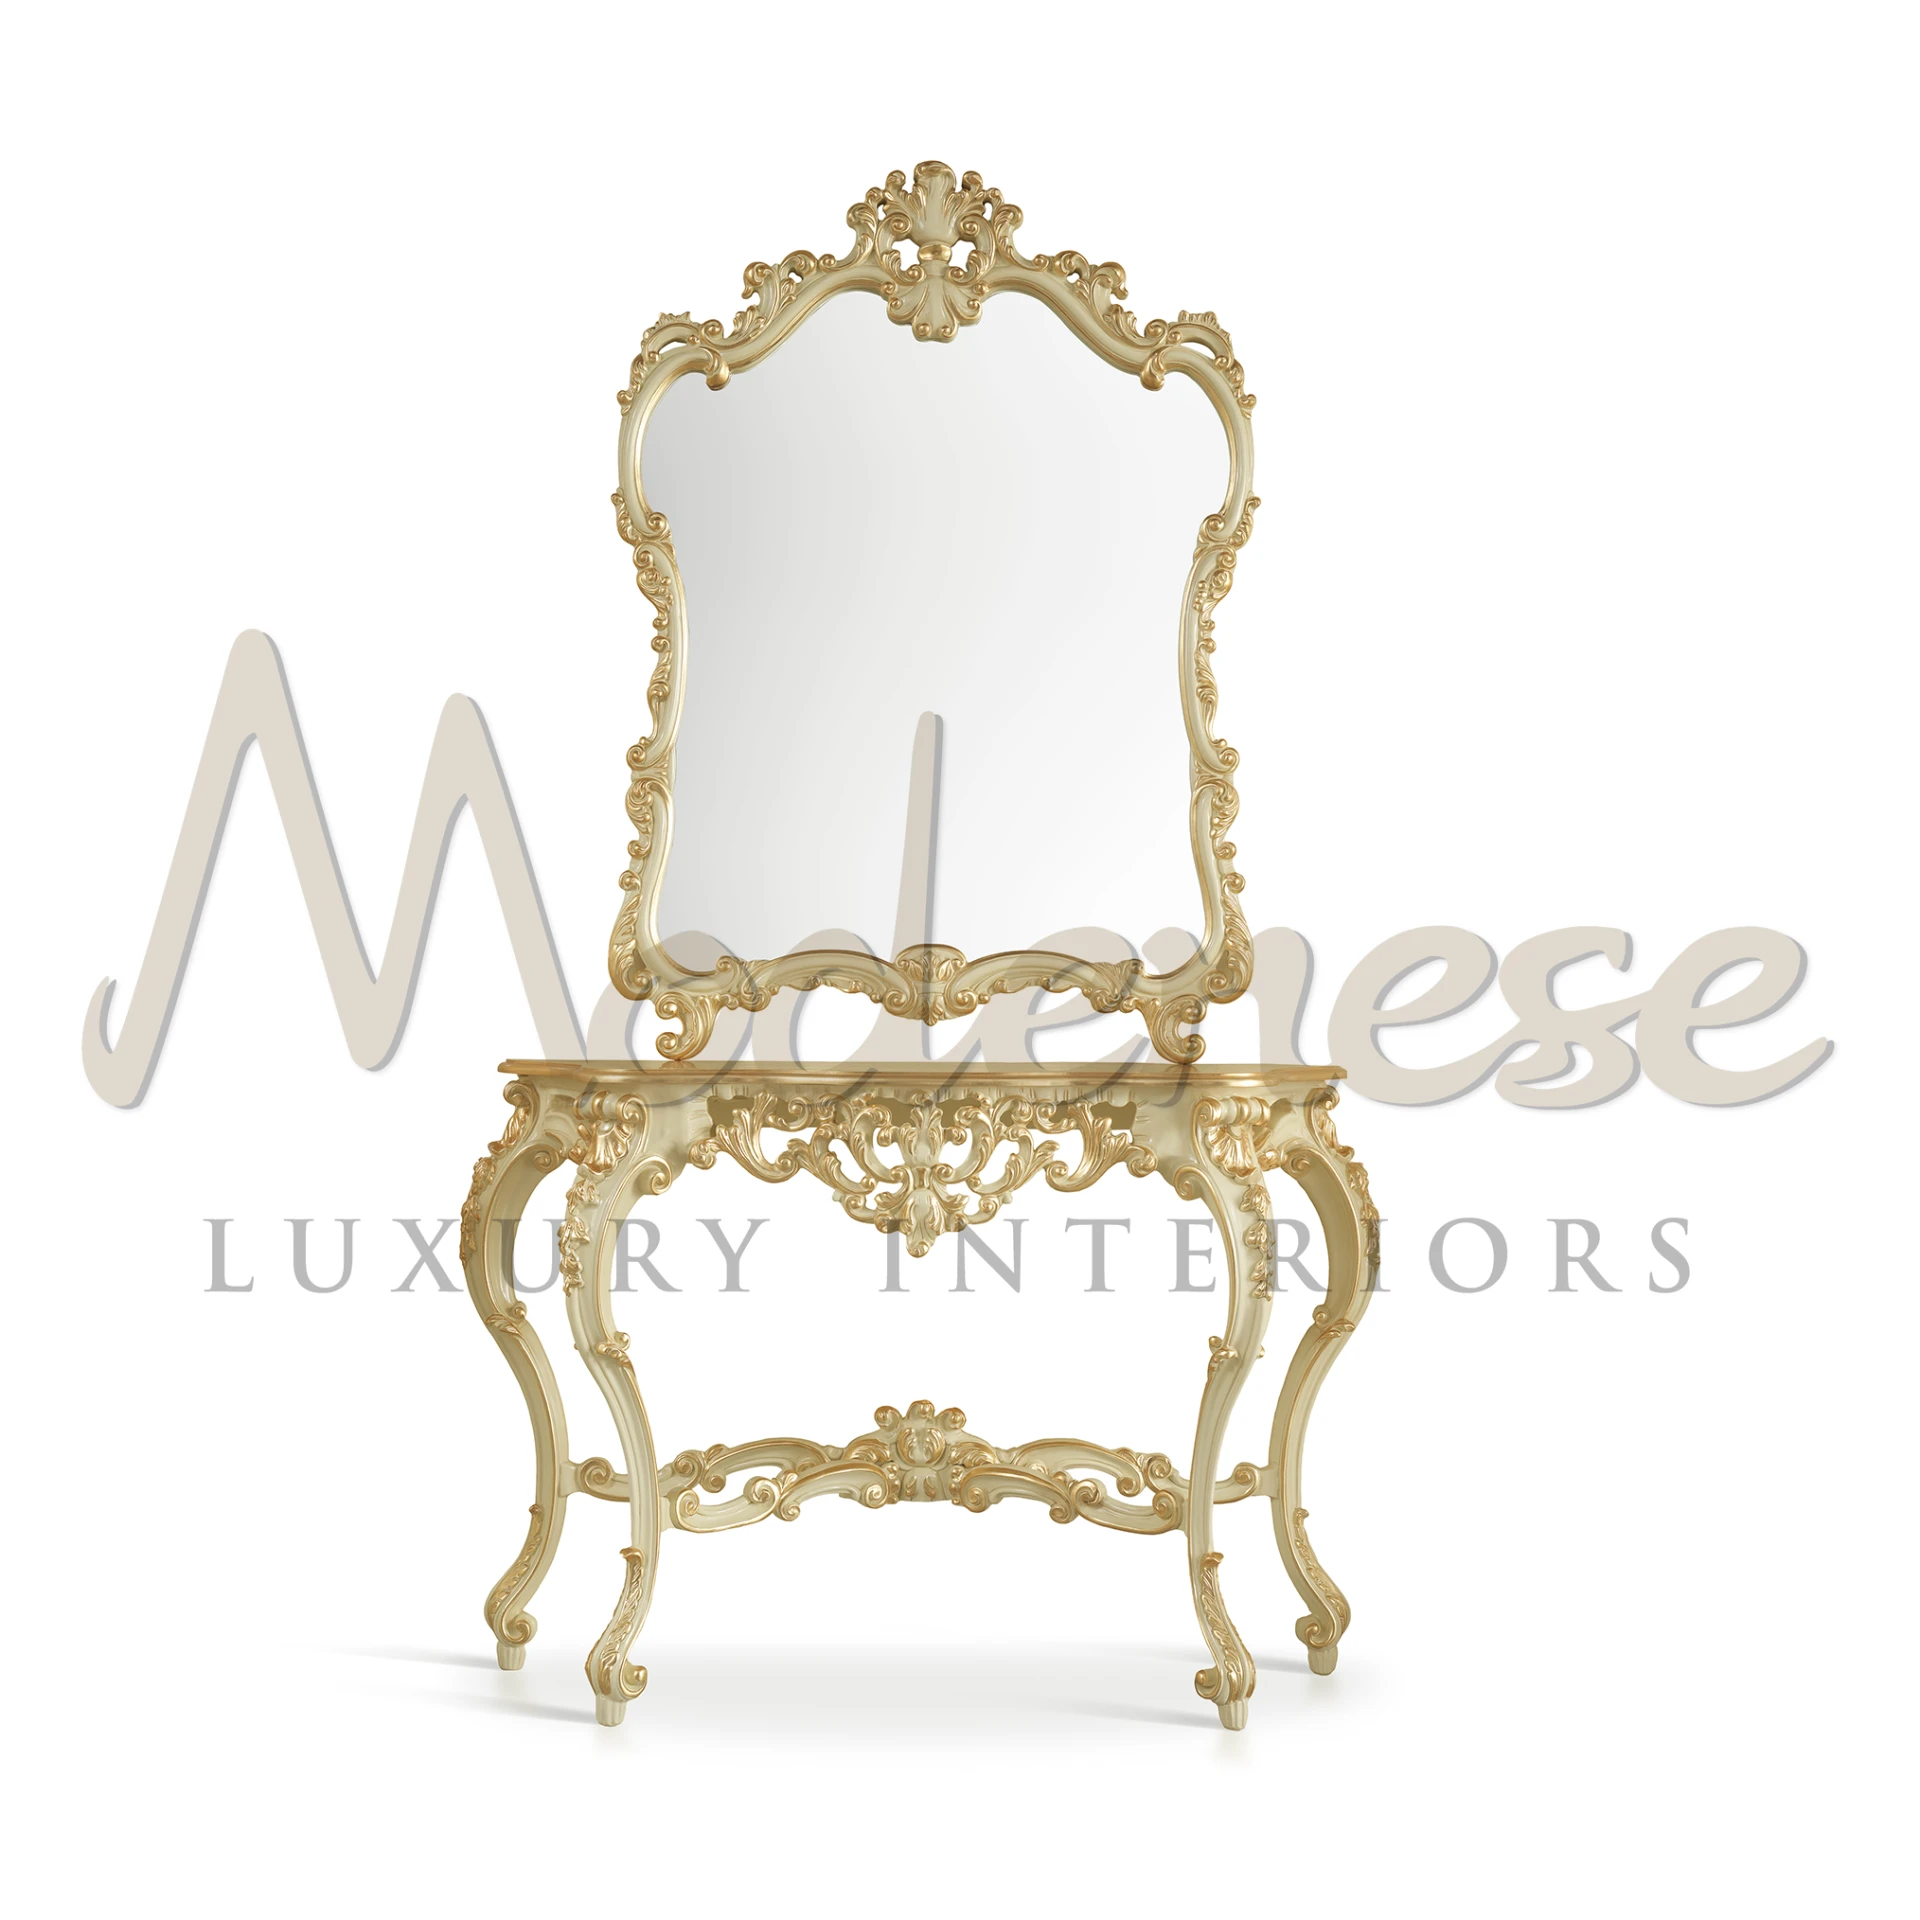 Exclusive Gilded Console Table, crafted with precision for high-end Italian furniture collections.